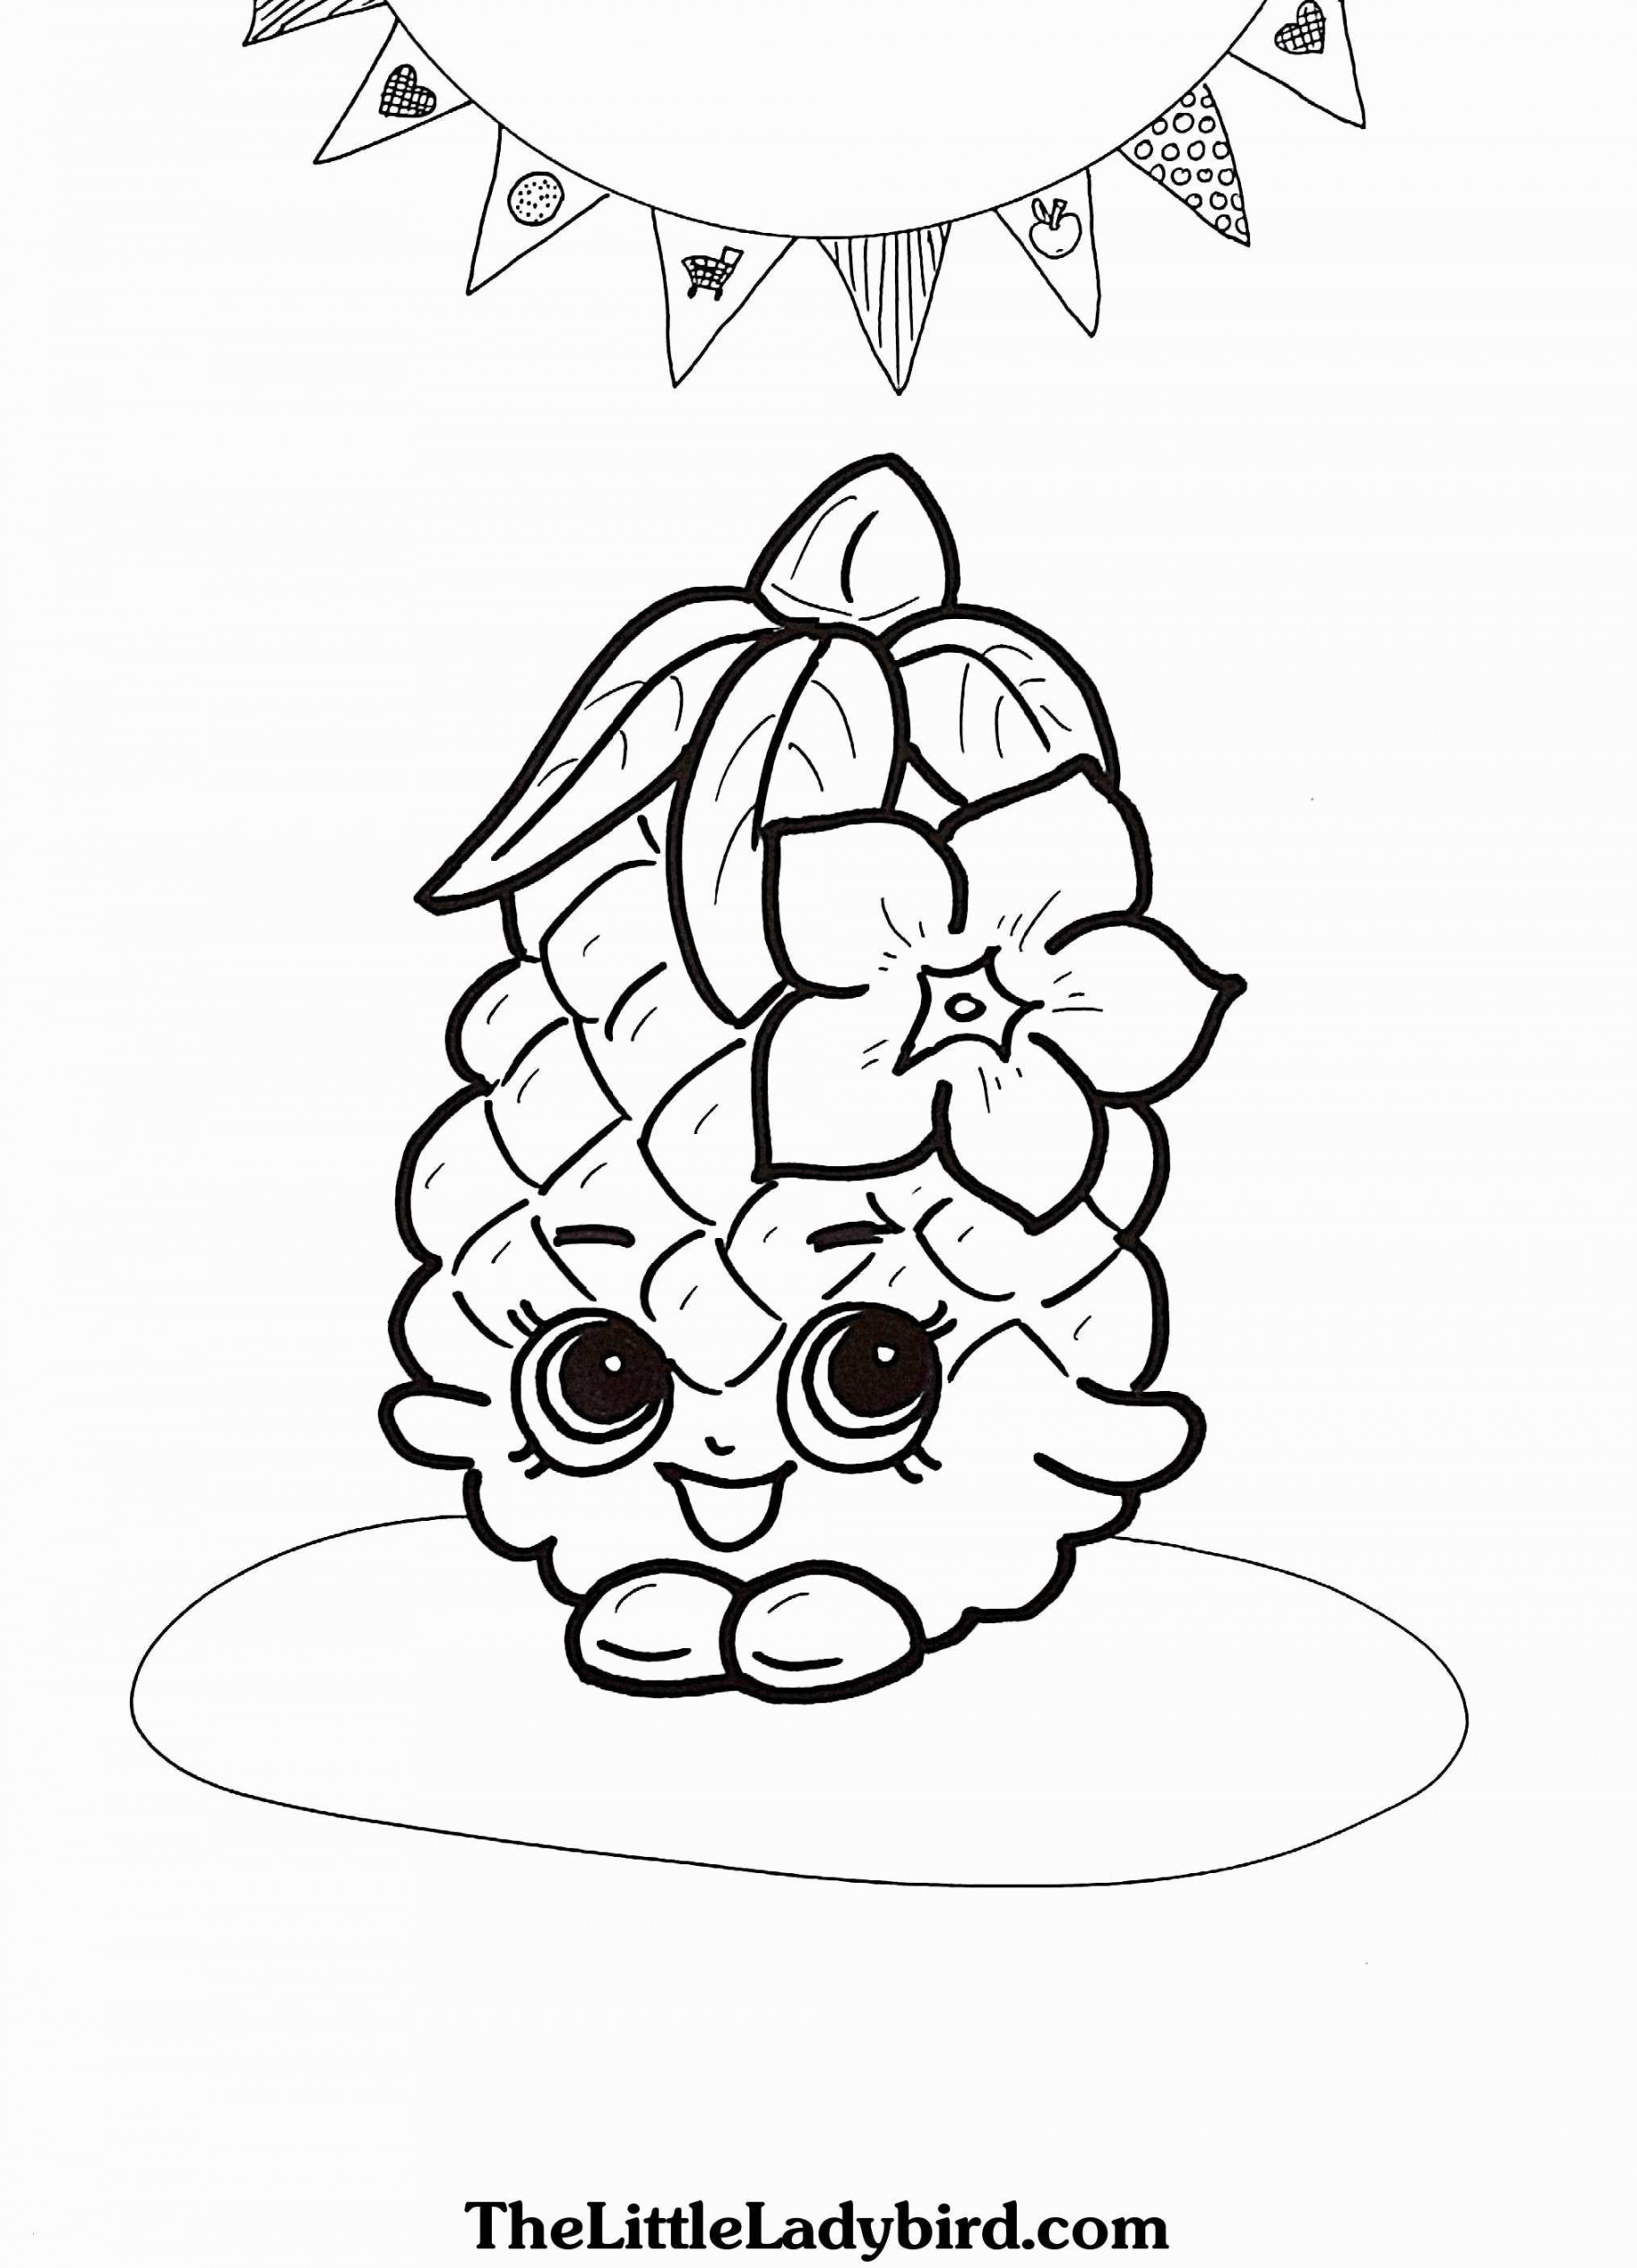 Coloring Pages For Elementary Students Coloring Pages Free Printable Coloring Pages For 5 Year Olds